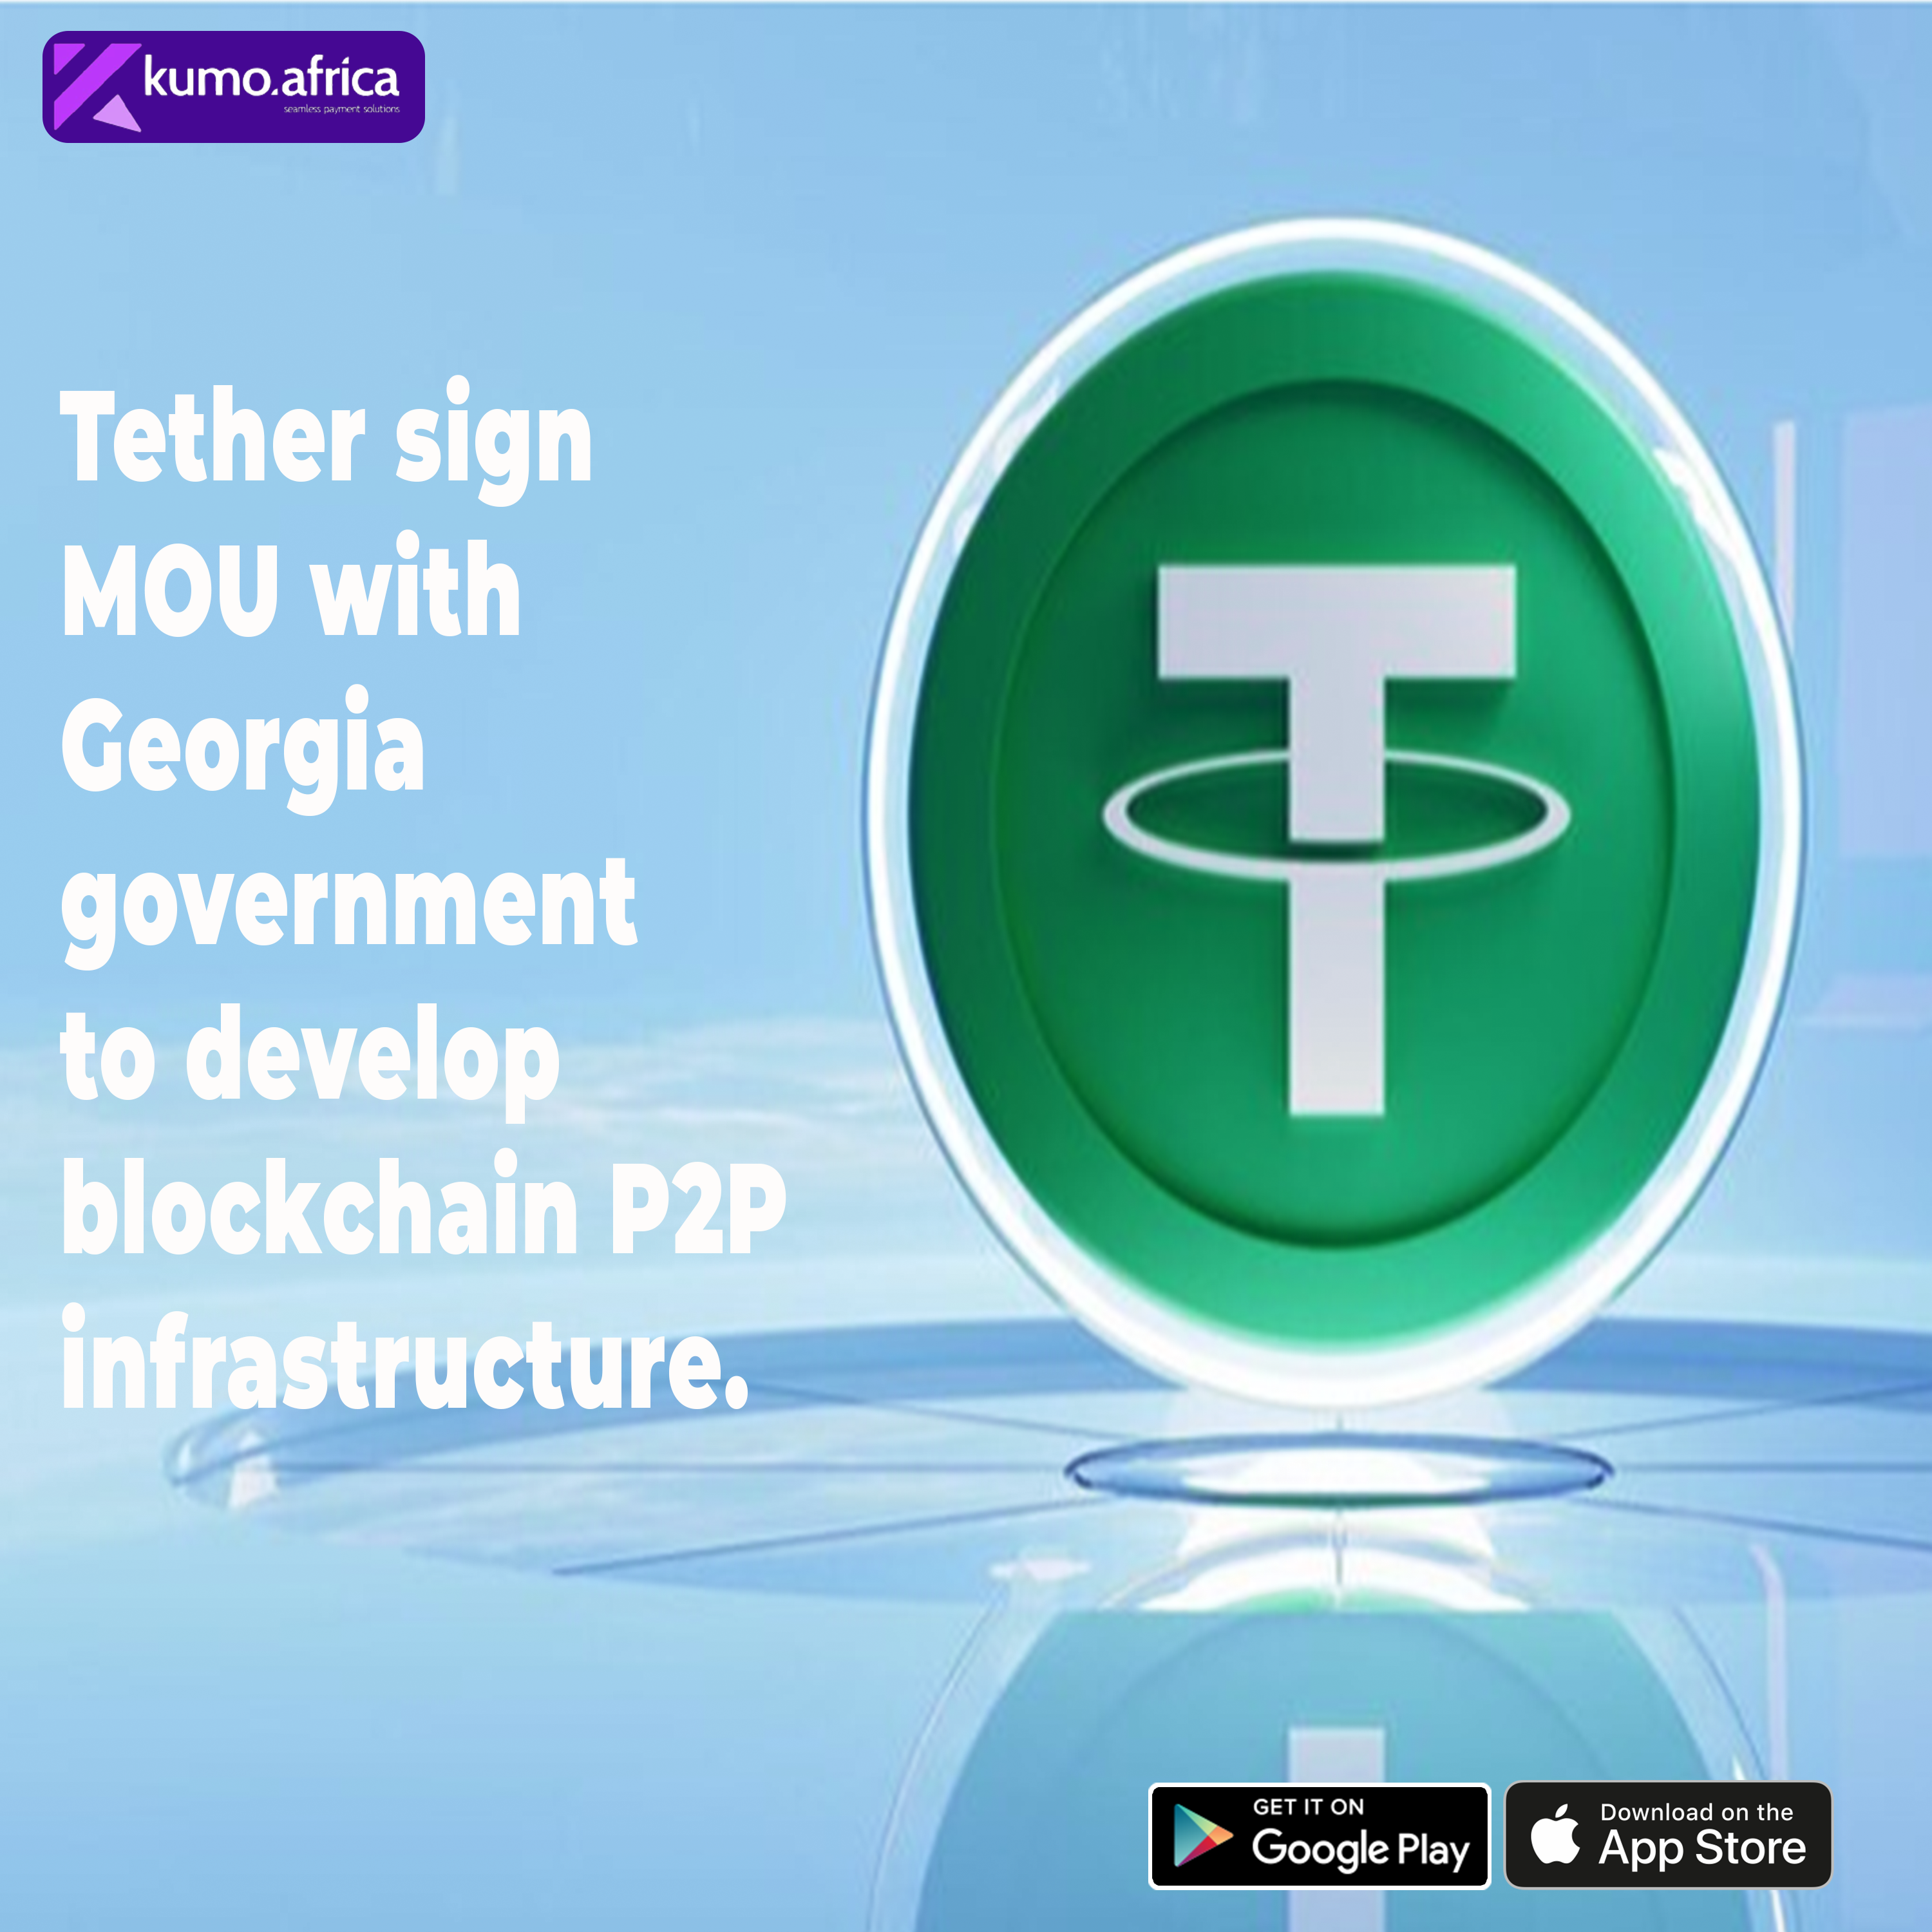 Tether Bitcoin P2P infrastructure